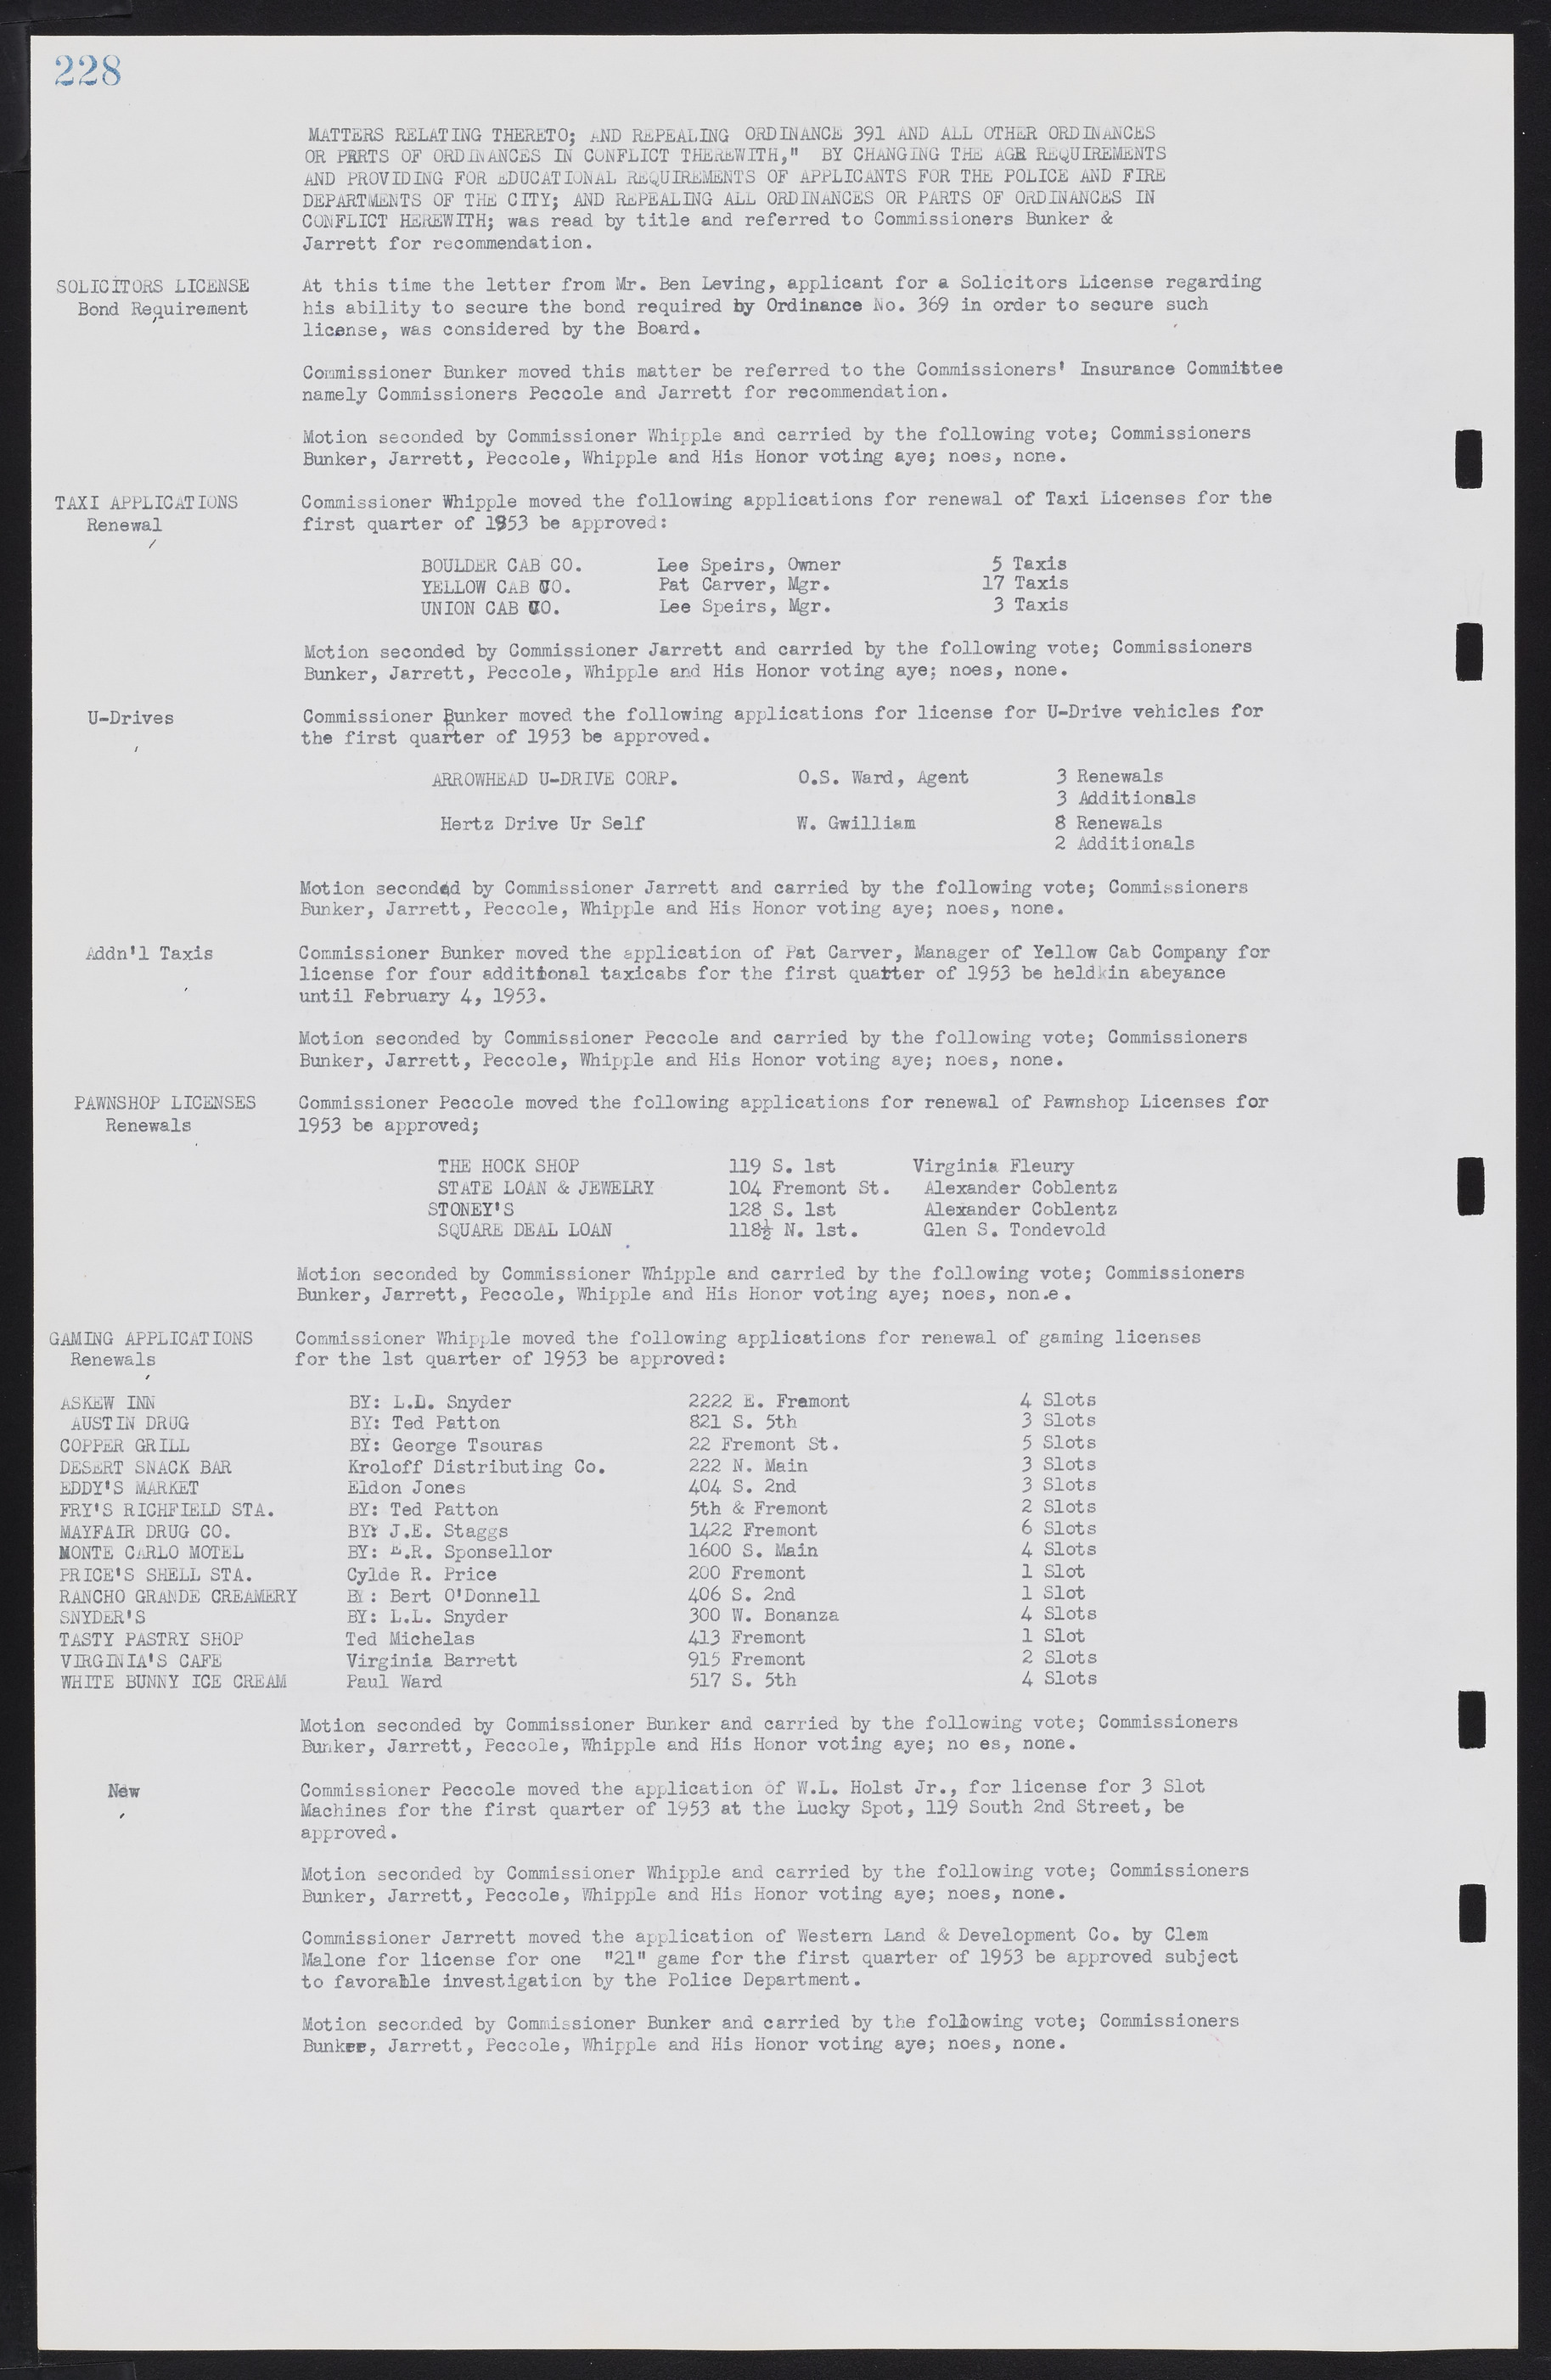 Las Vegas City Commission Minutes, May 26, 1952 to February 17, 1954, lvc000008-244